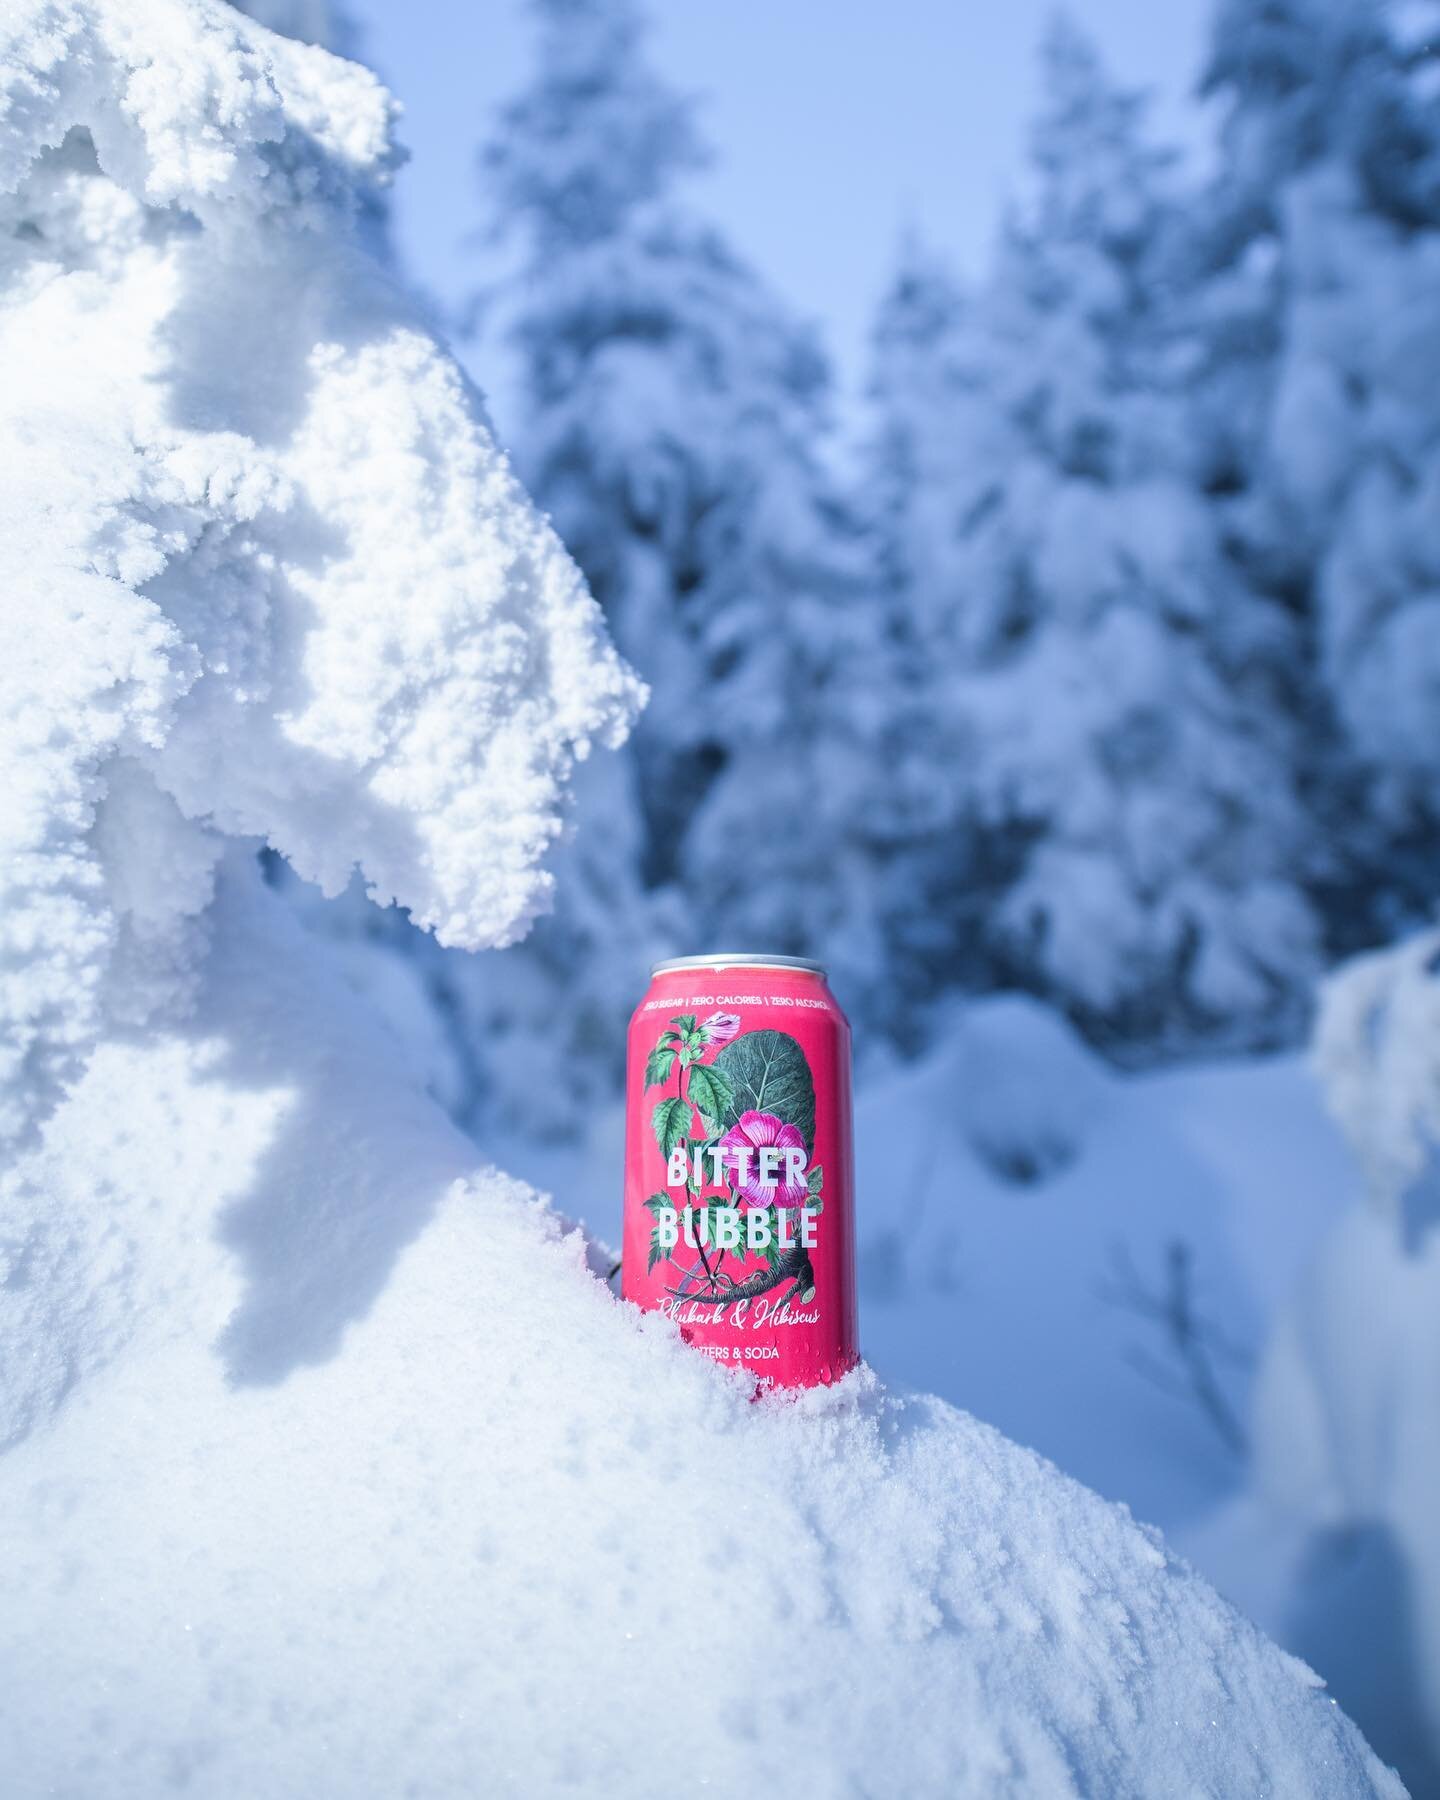 Grateful to be BORN IN VERMONT.
&bull;
We wish you a safe and happy new year and a Yeti full of ice cold Bitter Bubble!
&bull;

&bull;
@nathanaelasaro @nathanaelasaro.studio 
#seltzer #borninvermont #bitterbubble #sparklingwater #bitters #sodawater #